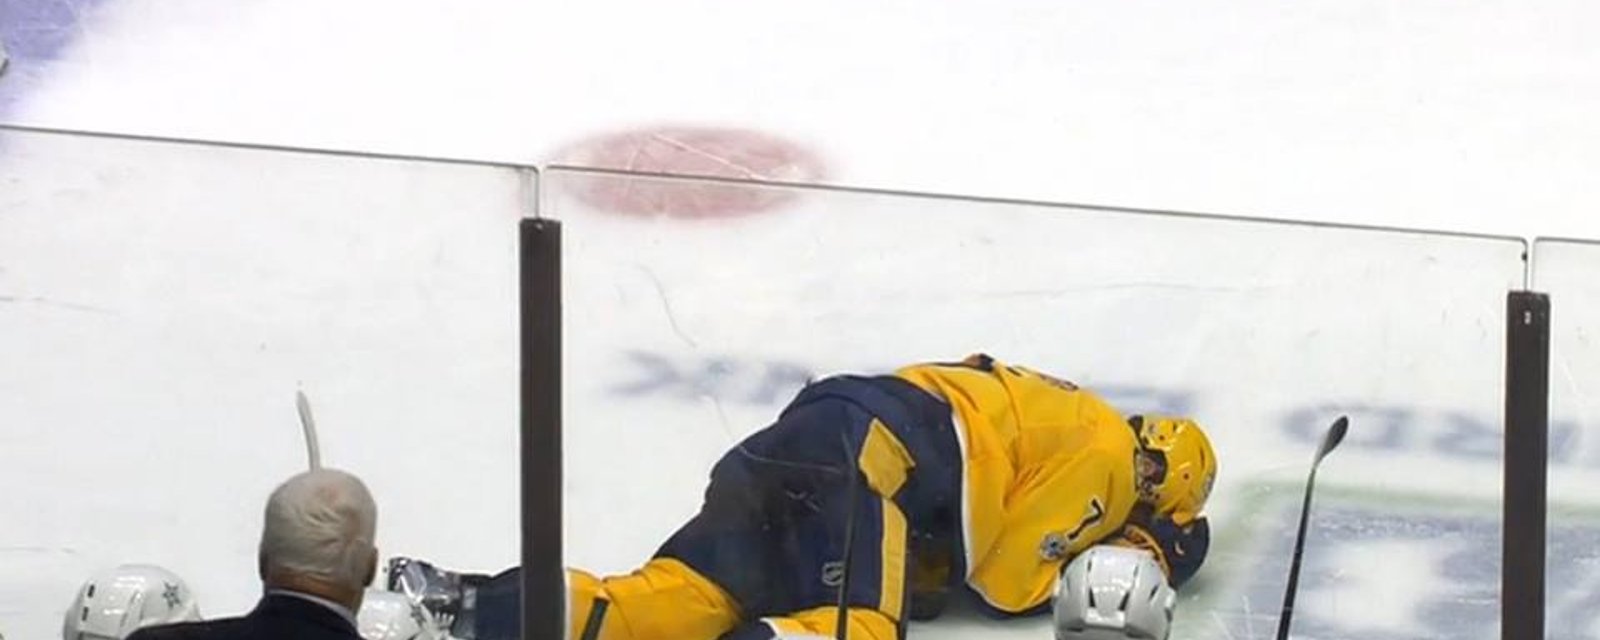 Former Habs' defenseman got destroyed with huge hit to the head